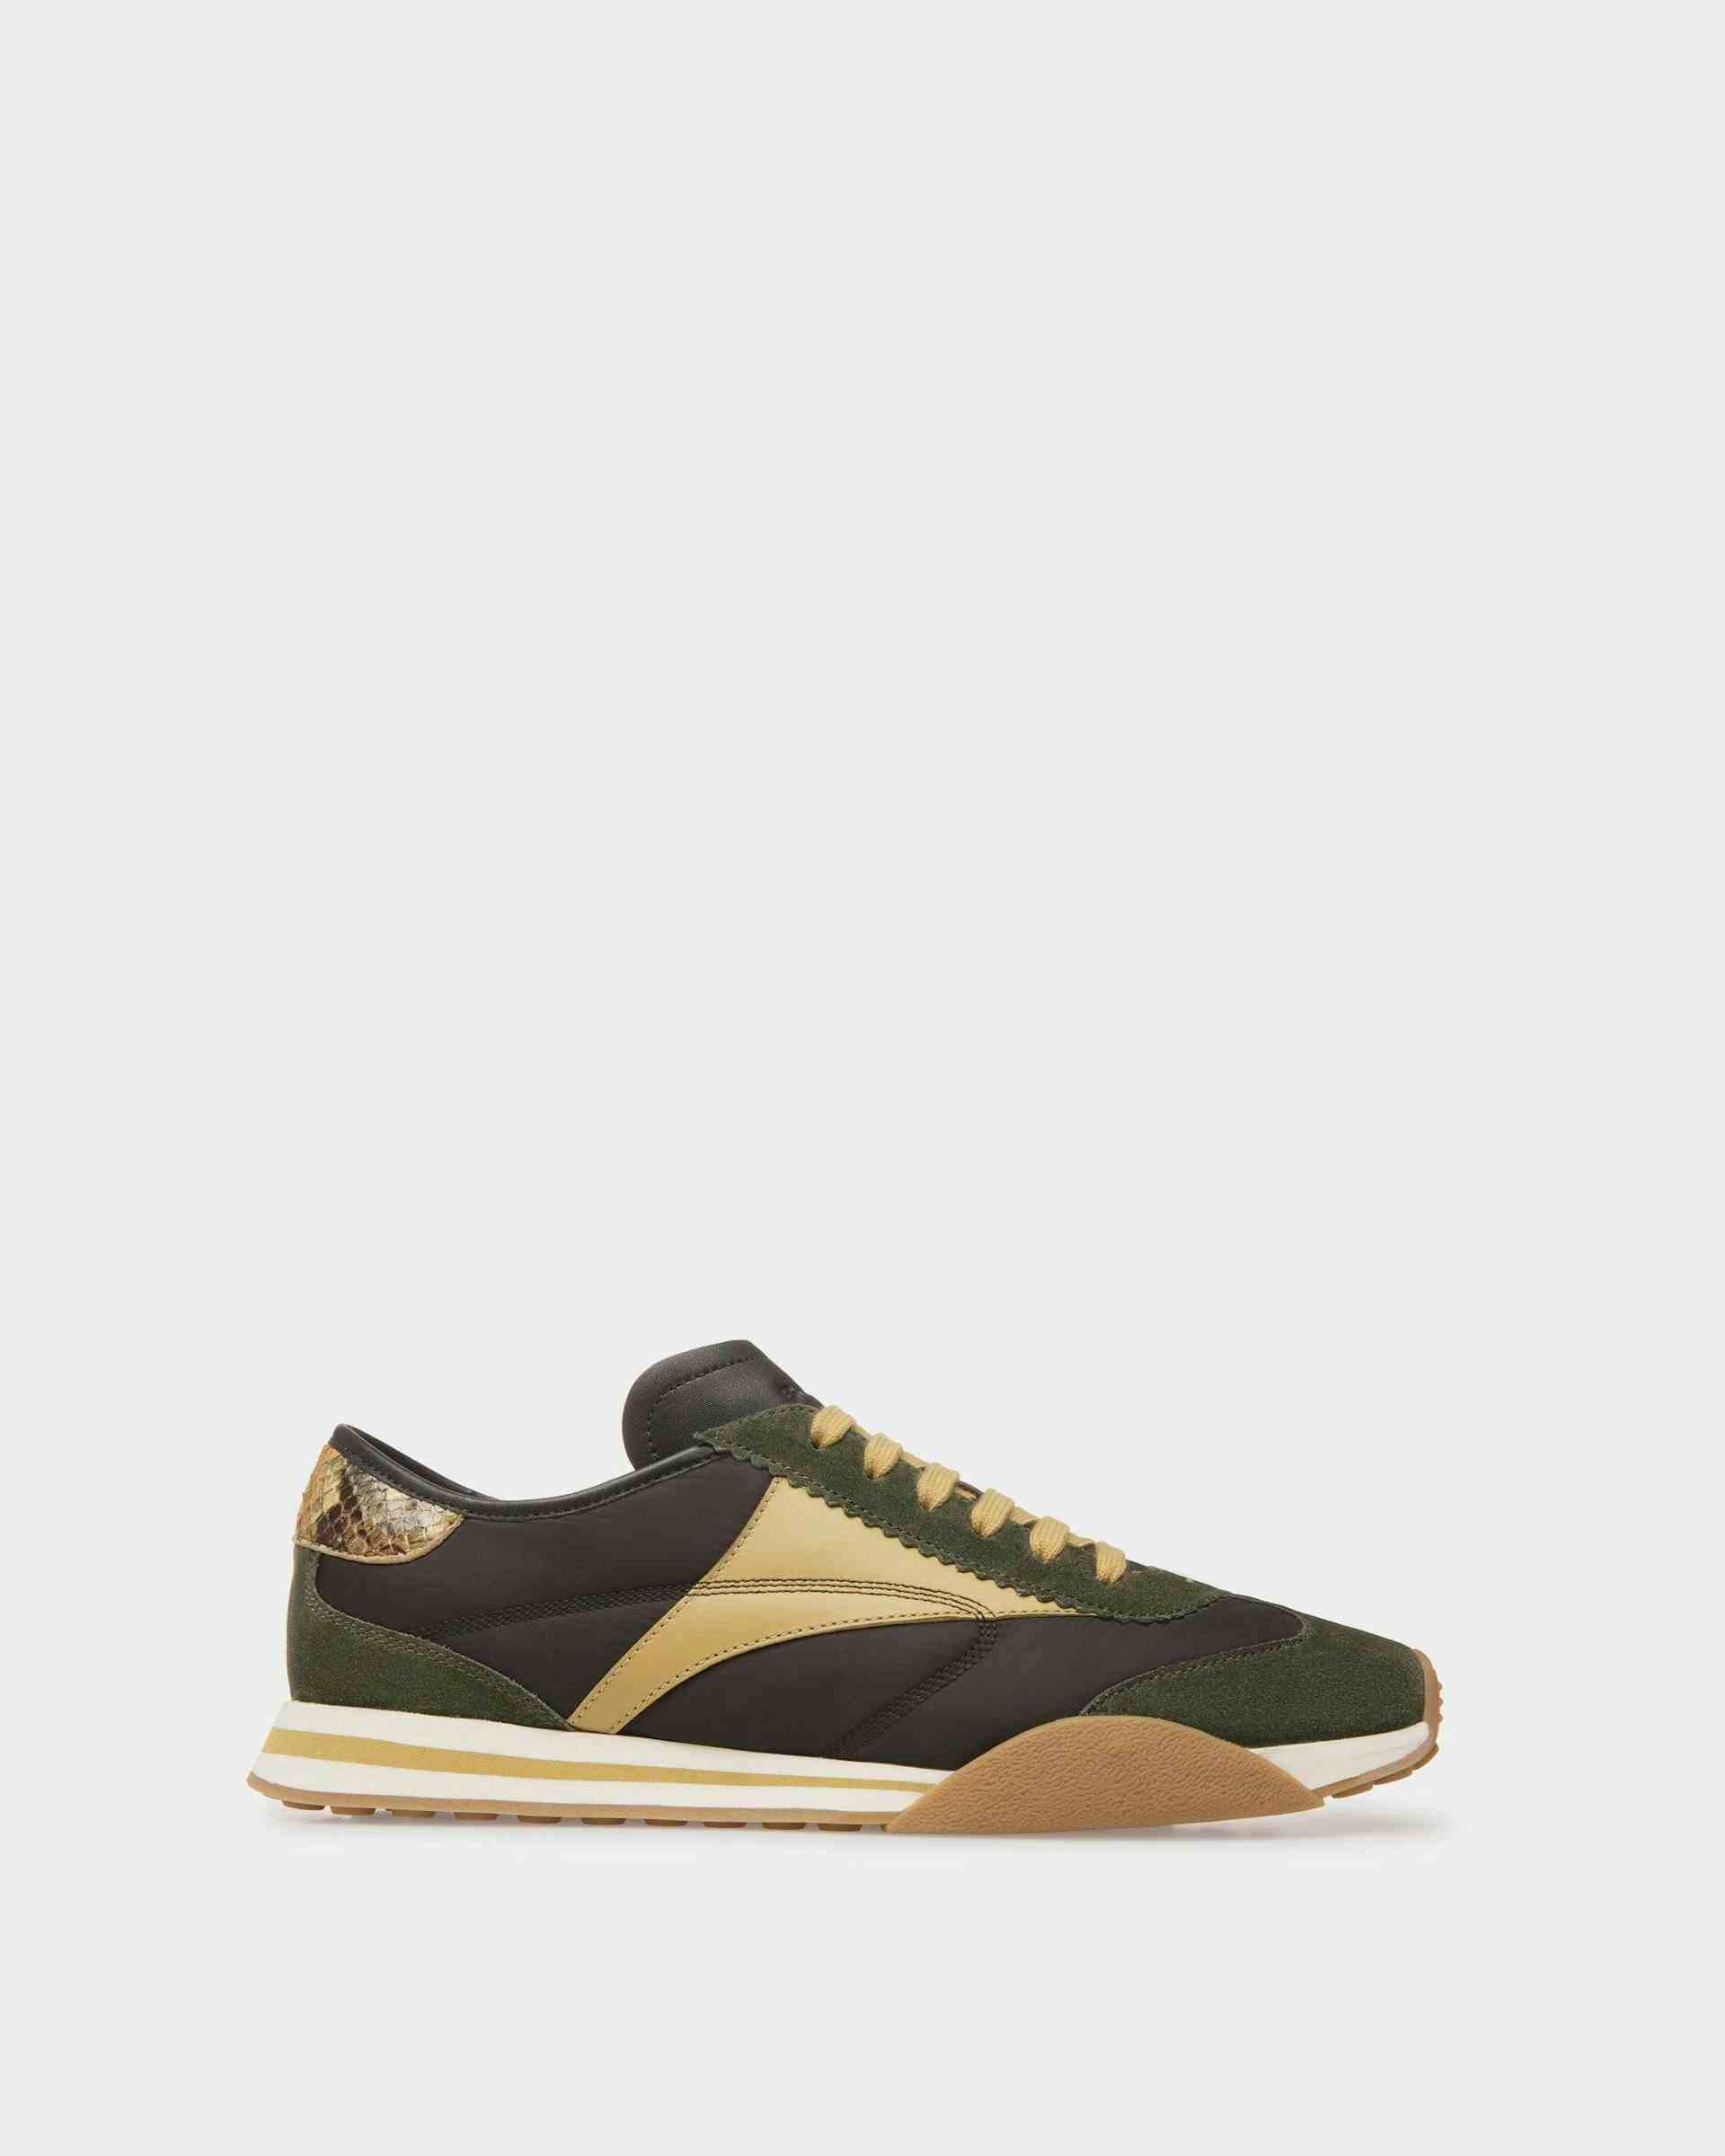 Sussex Sneakers In Green And Black Leather And Fabric - Men's - Bally